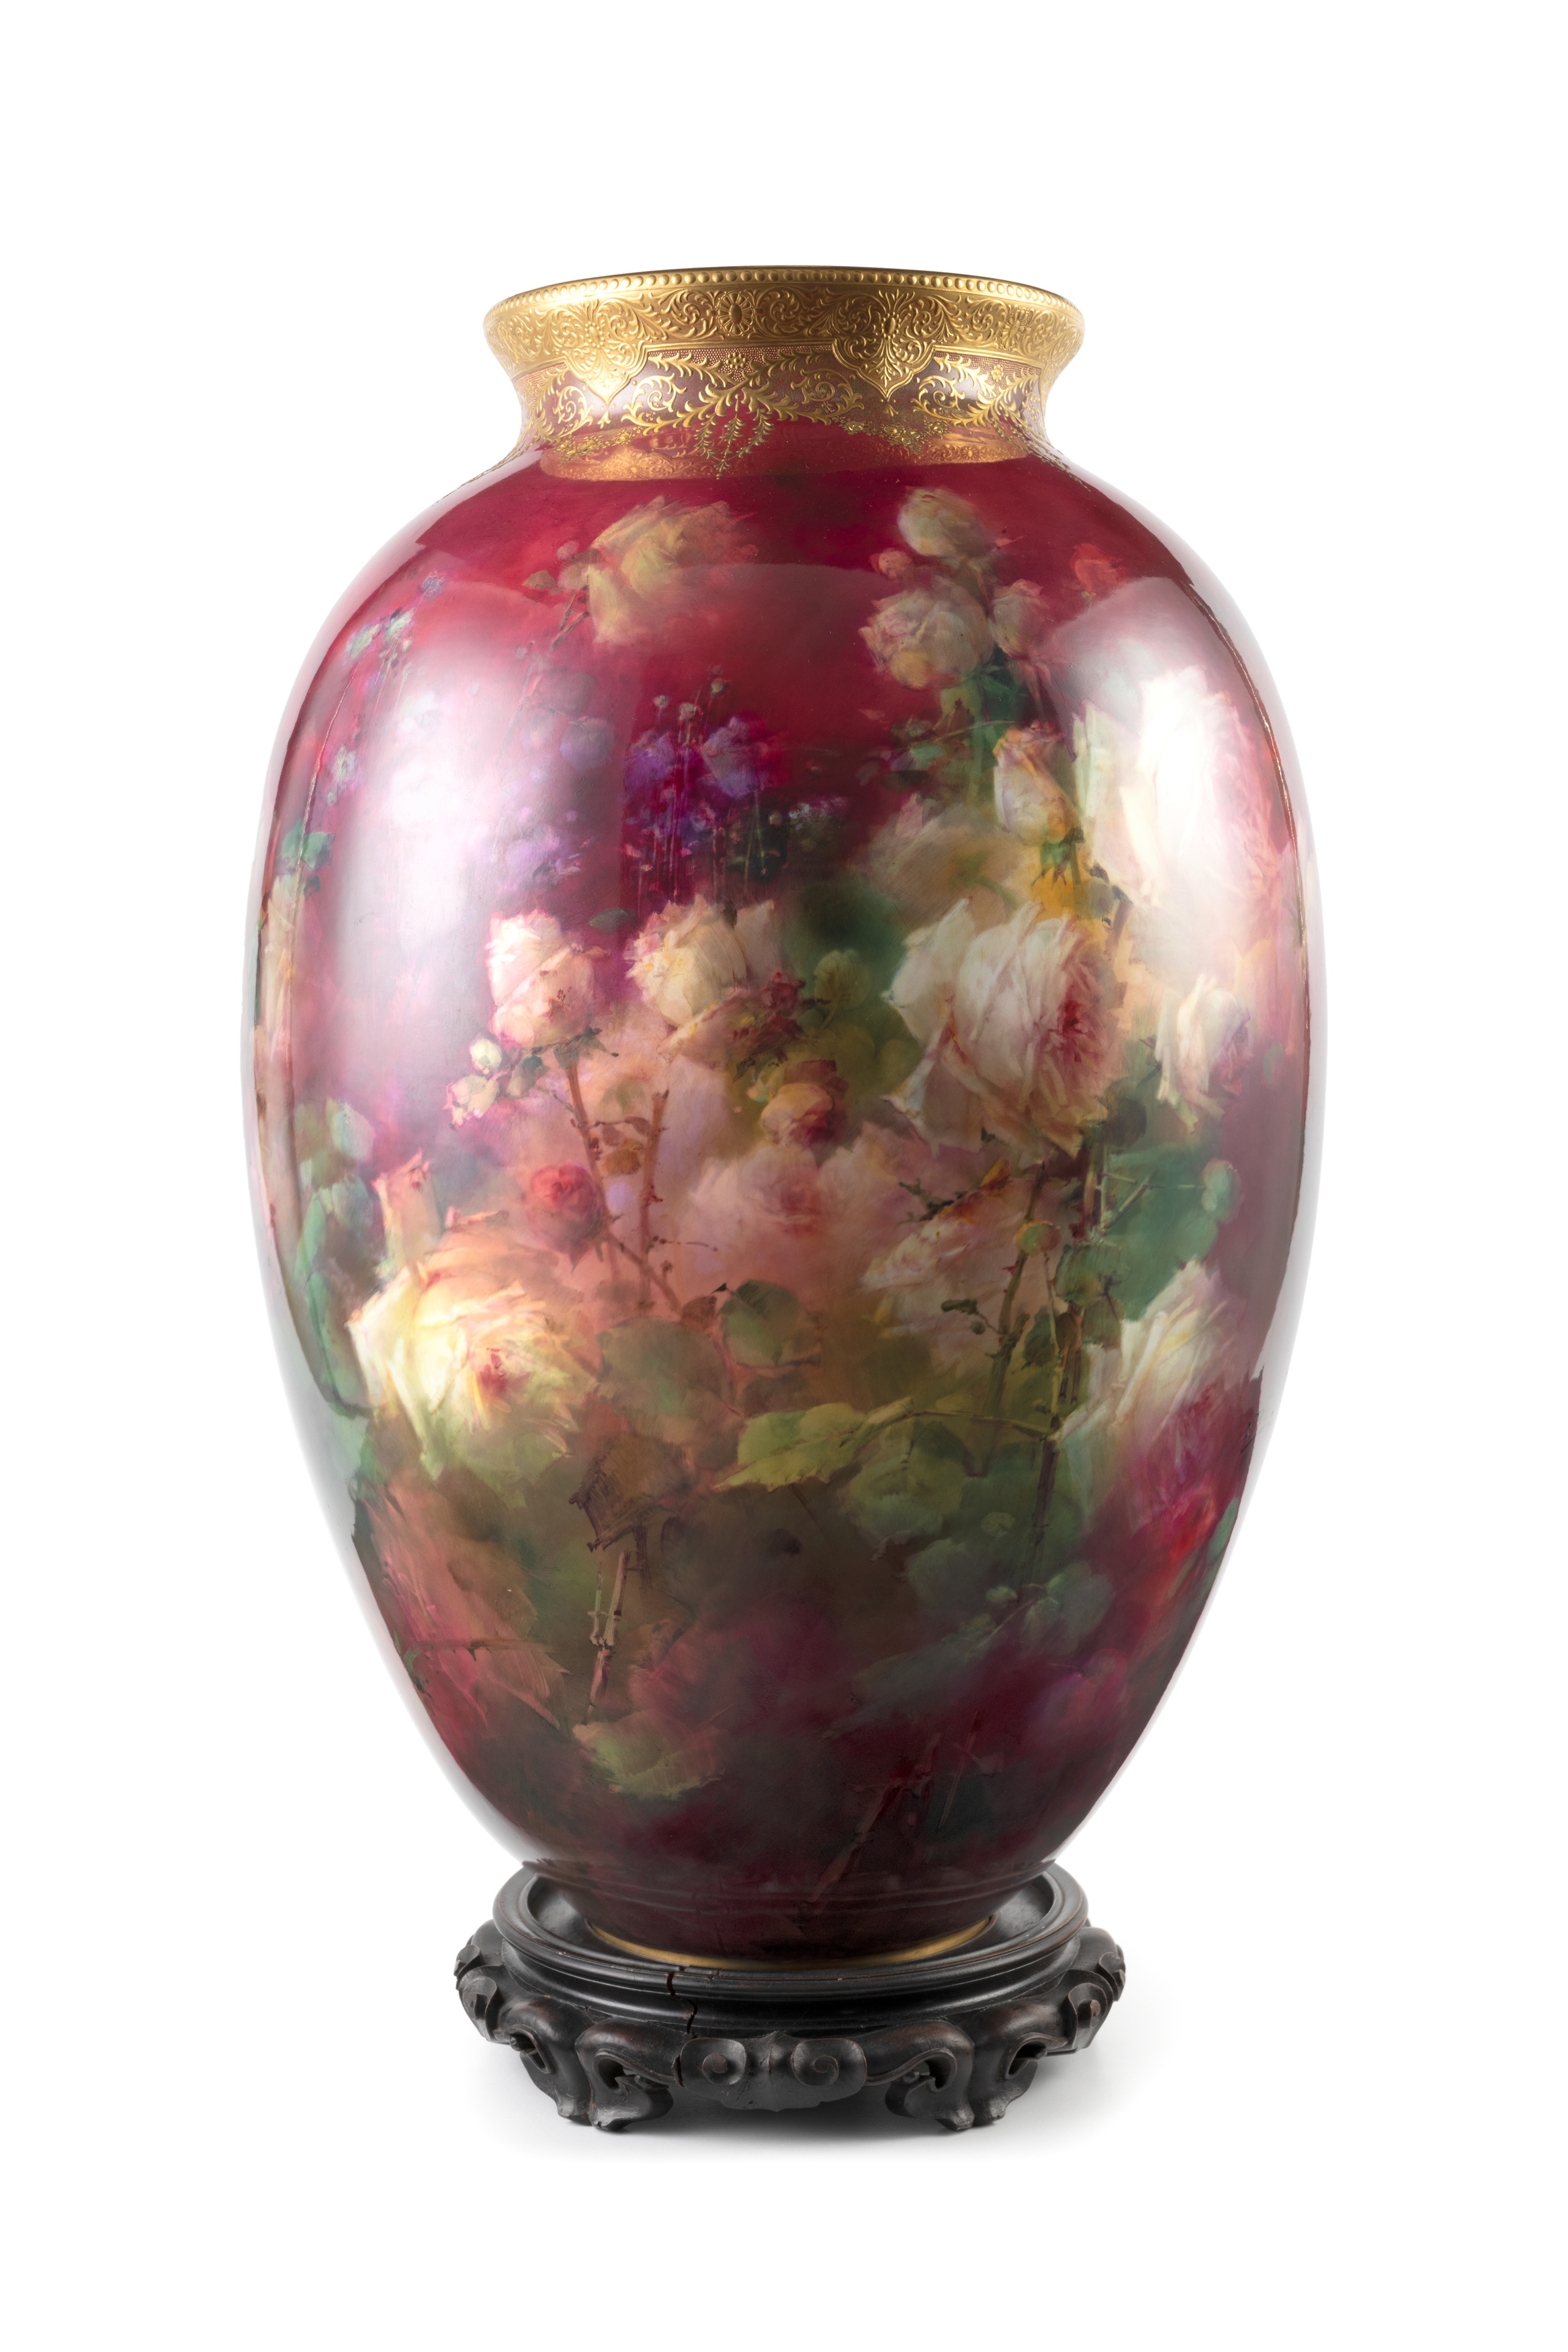 Doulton porcelain vase painted by Edward Raby